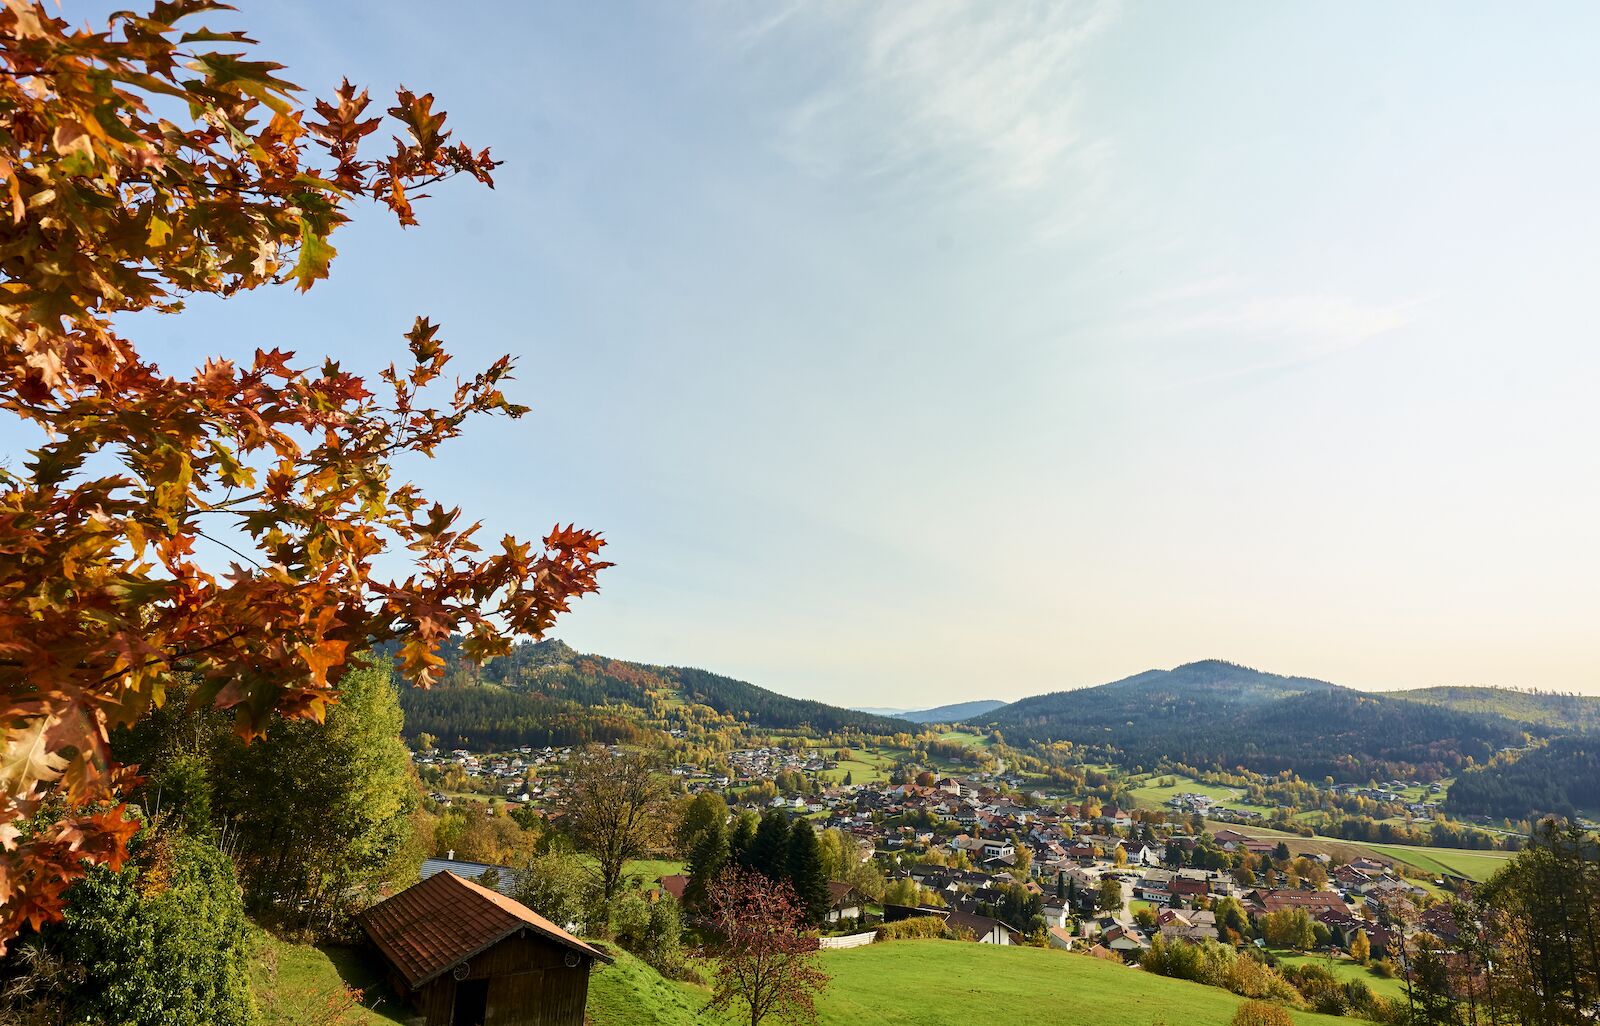 Bodenmais, a town in the Bavarian Forest